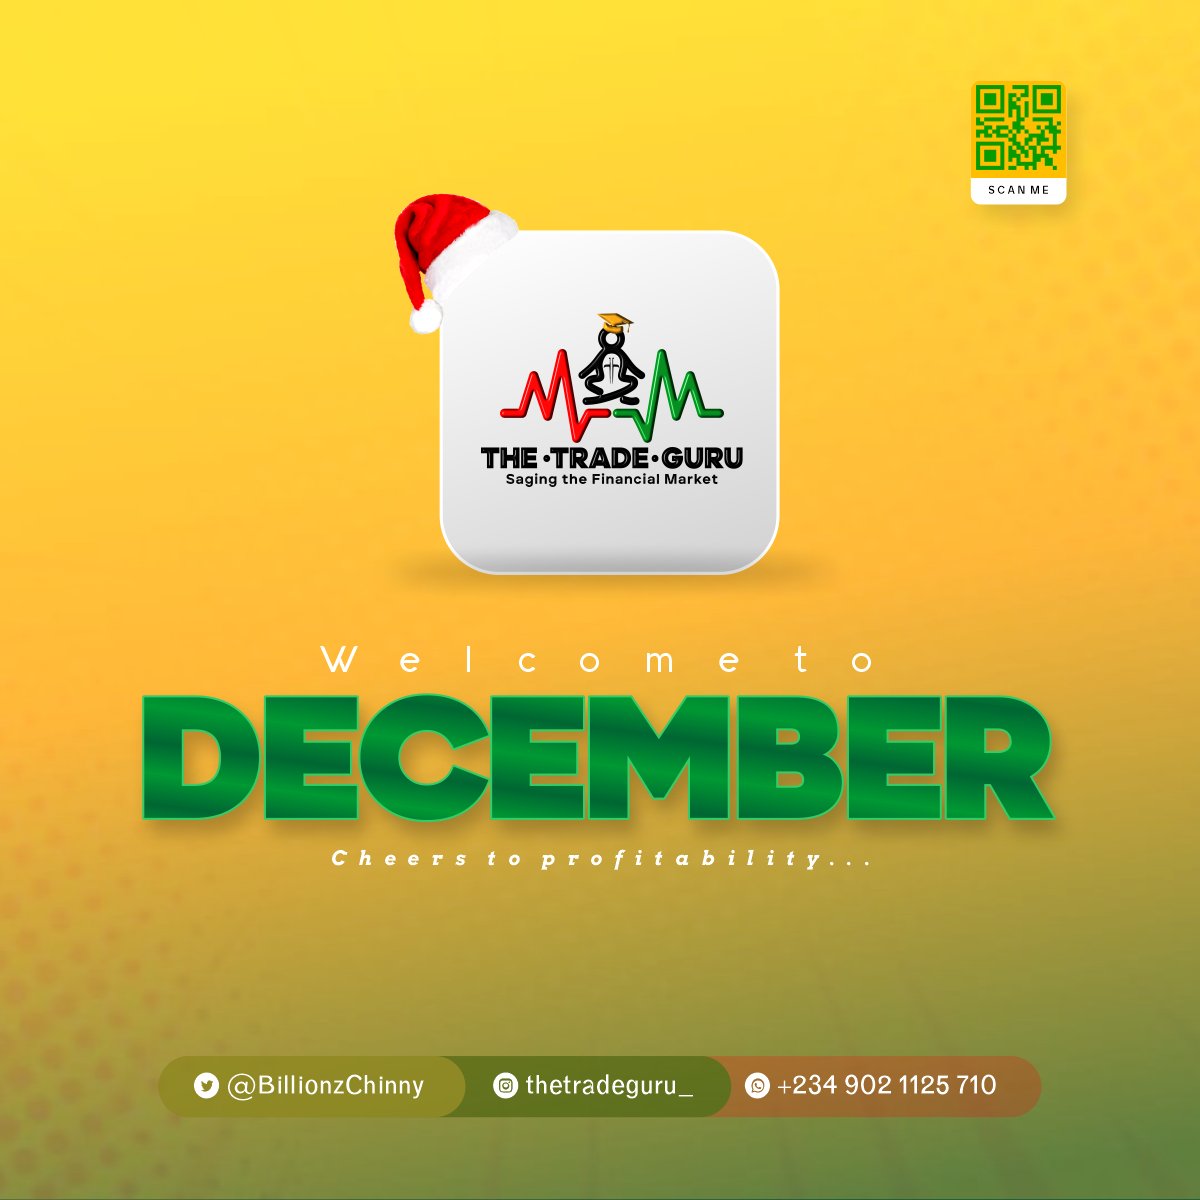 You may have fallen down ten or ten thousand times this year
I want to remind you that #December is not a deadline for your goals..you can still make a household name step by step
Cheers to profitability this month

#TradeguruAcademy #WAGMIARMY #hustlefund #Hexicans #Crypto #DeFi